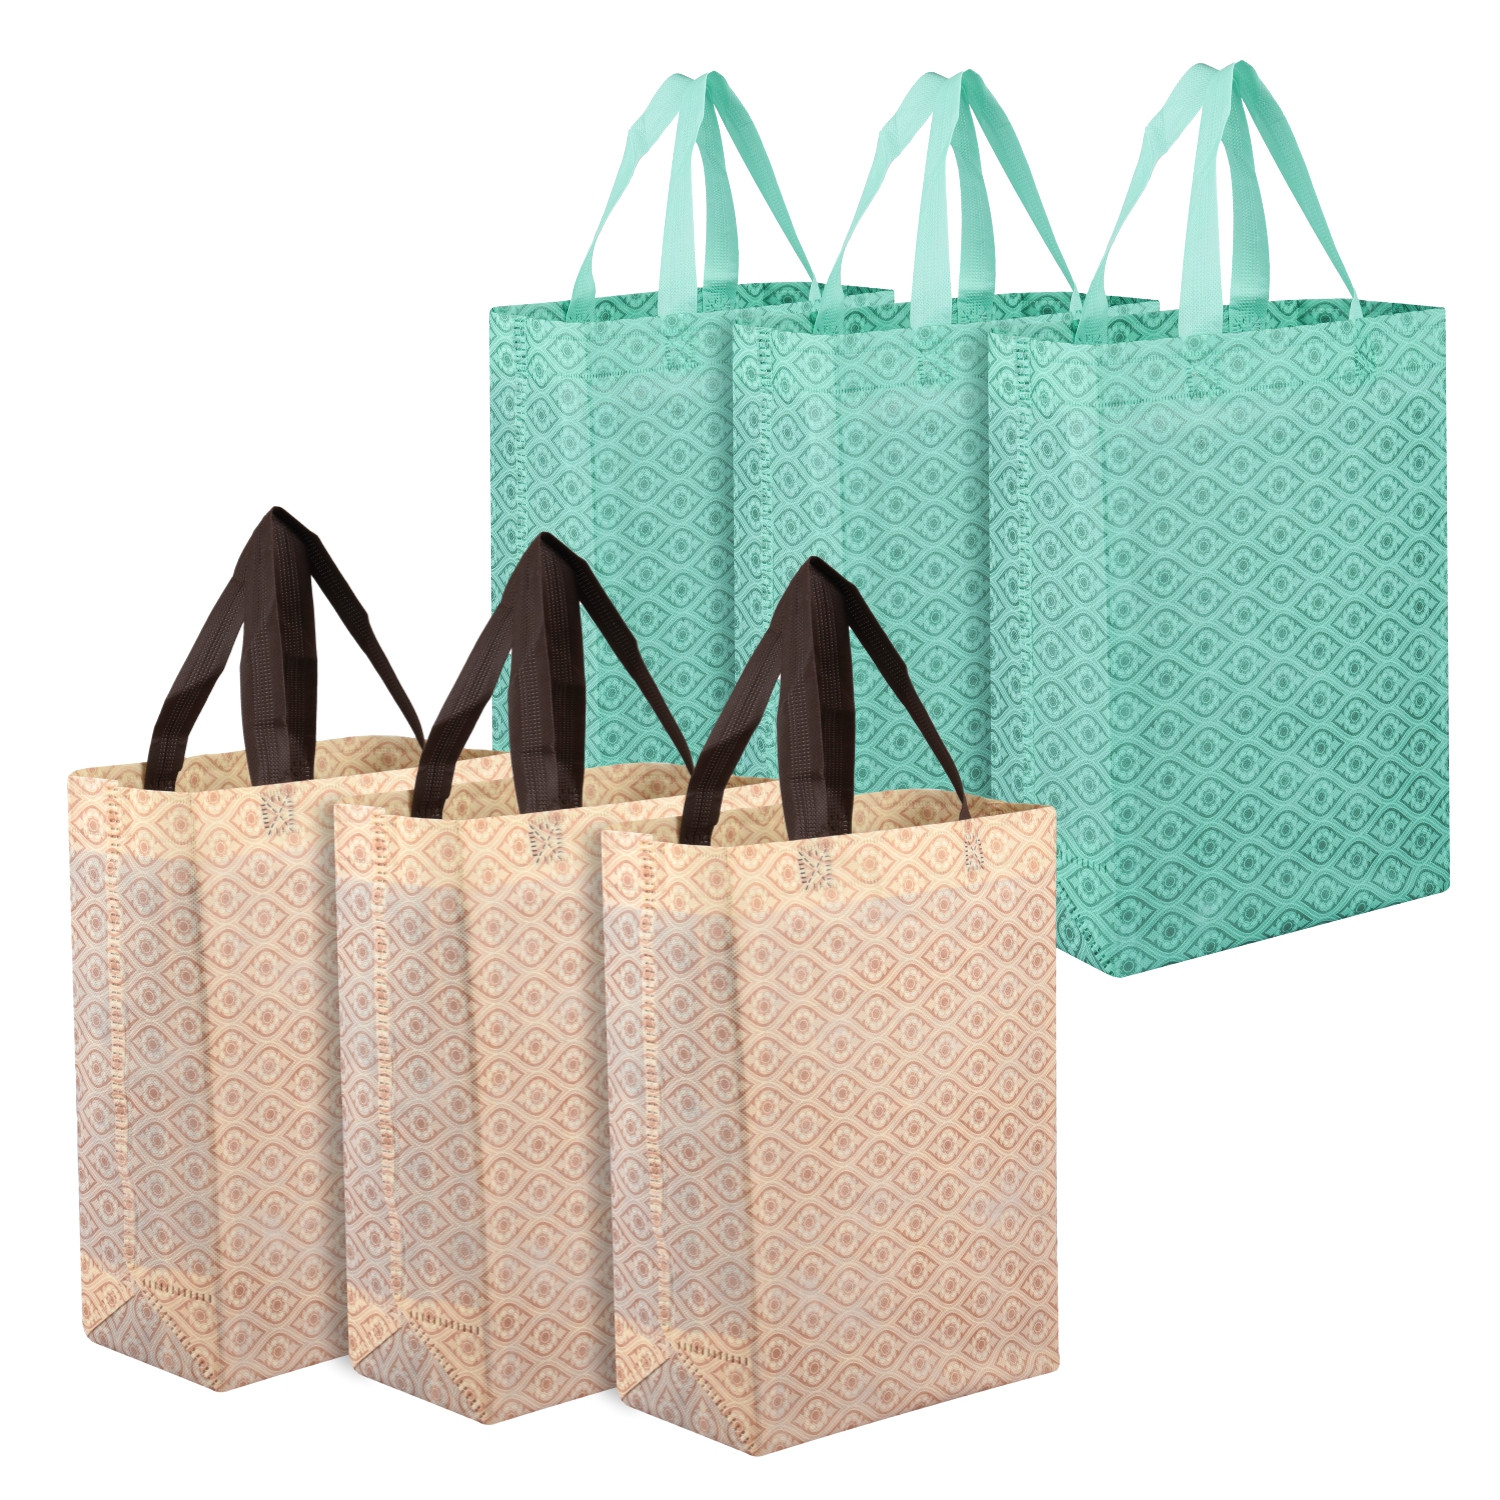 Forever Cotton Natural Cotton Plain Tote Shopping Bags with Extra Strong  Heavy Duty, Washable, Eco-Friendly